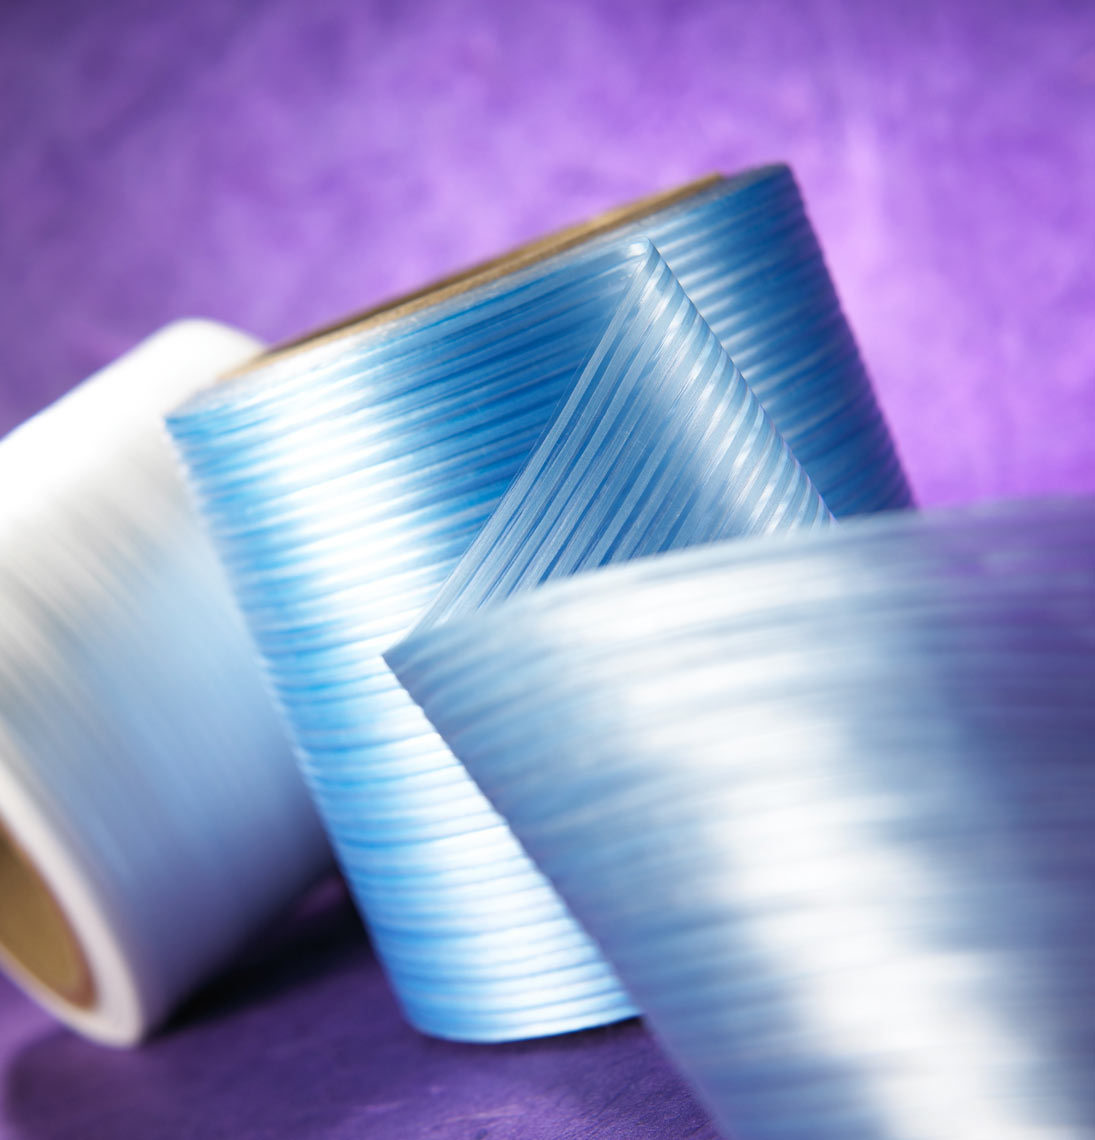 Medical tape/spools/blue/white/purple background/medical photography